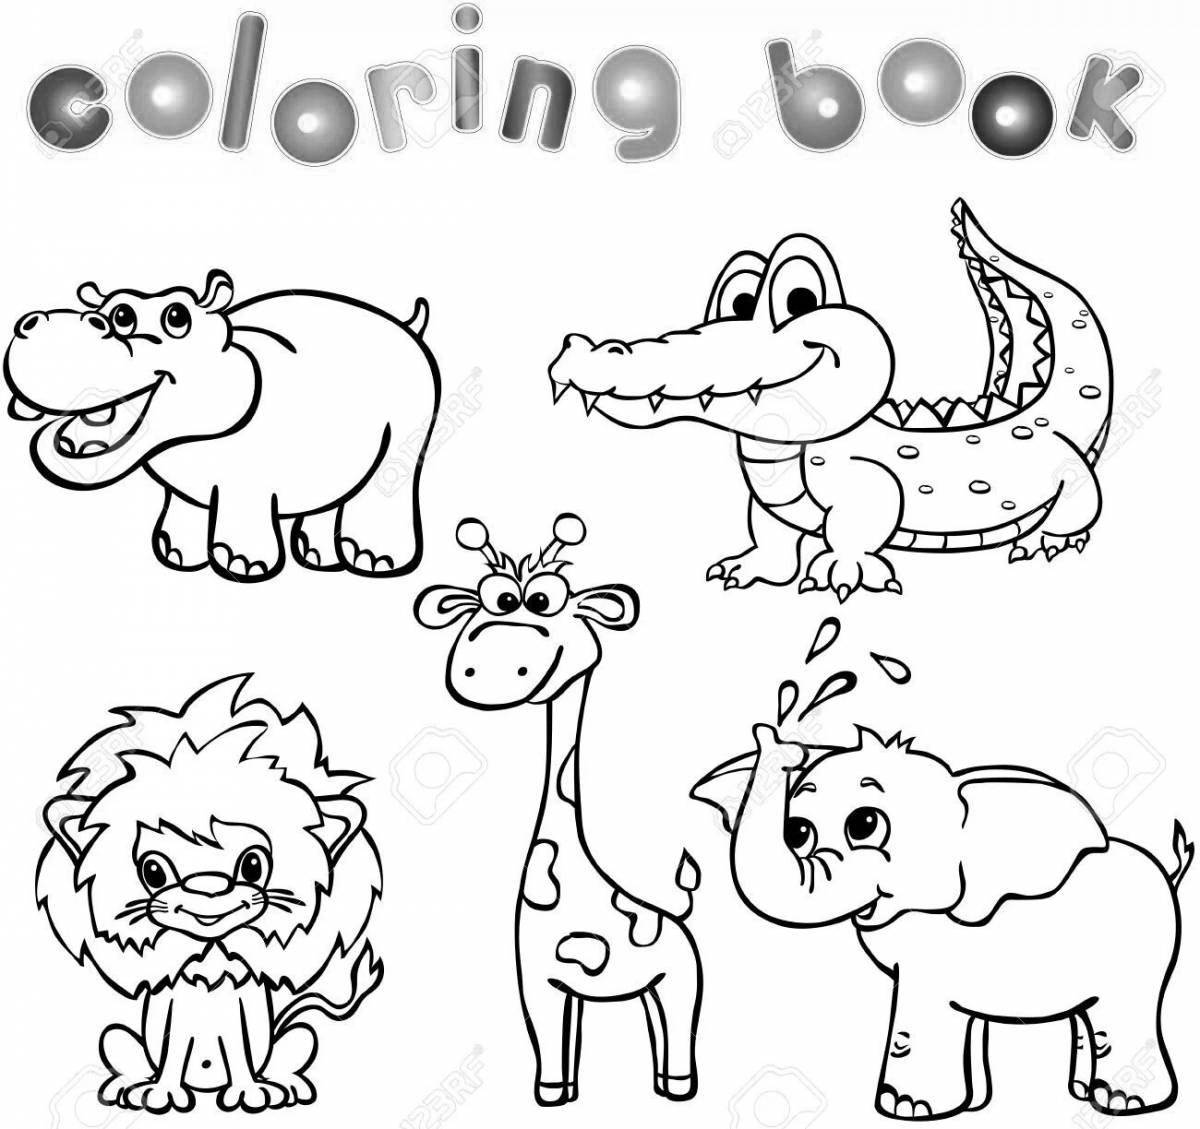 Lovely English animal coloring book for kids